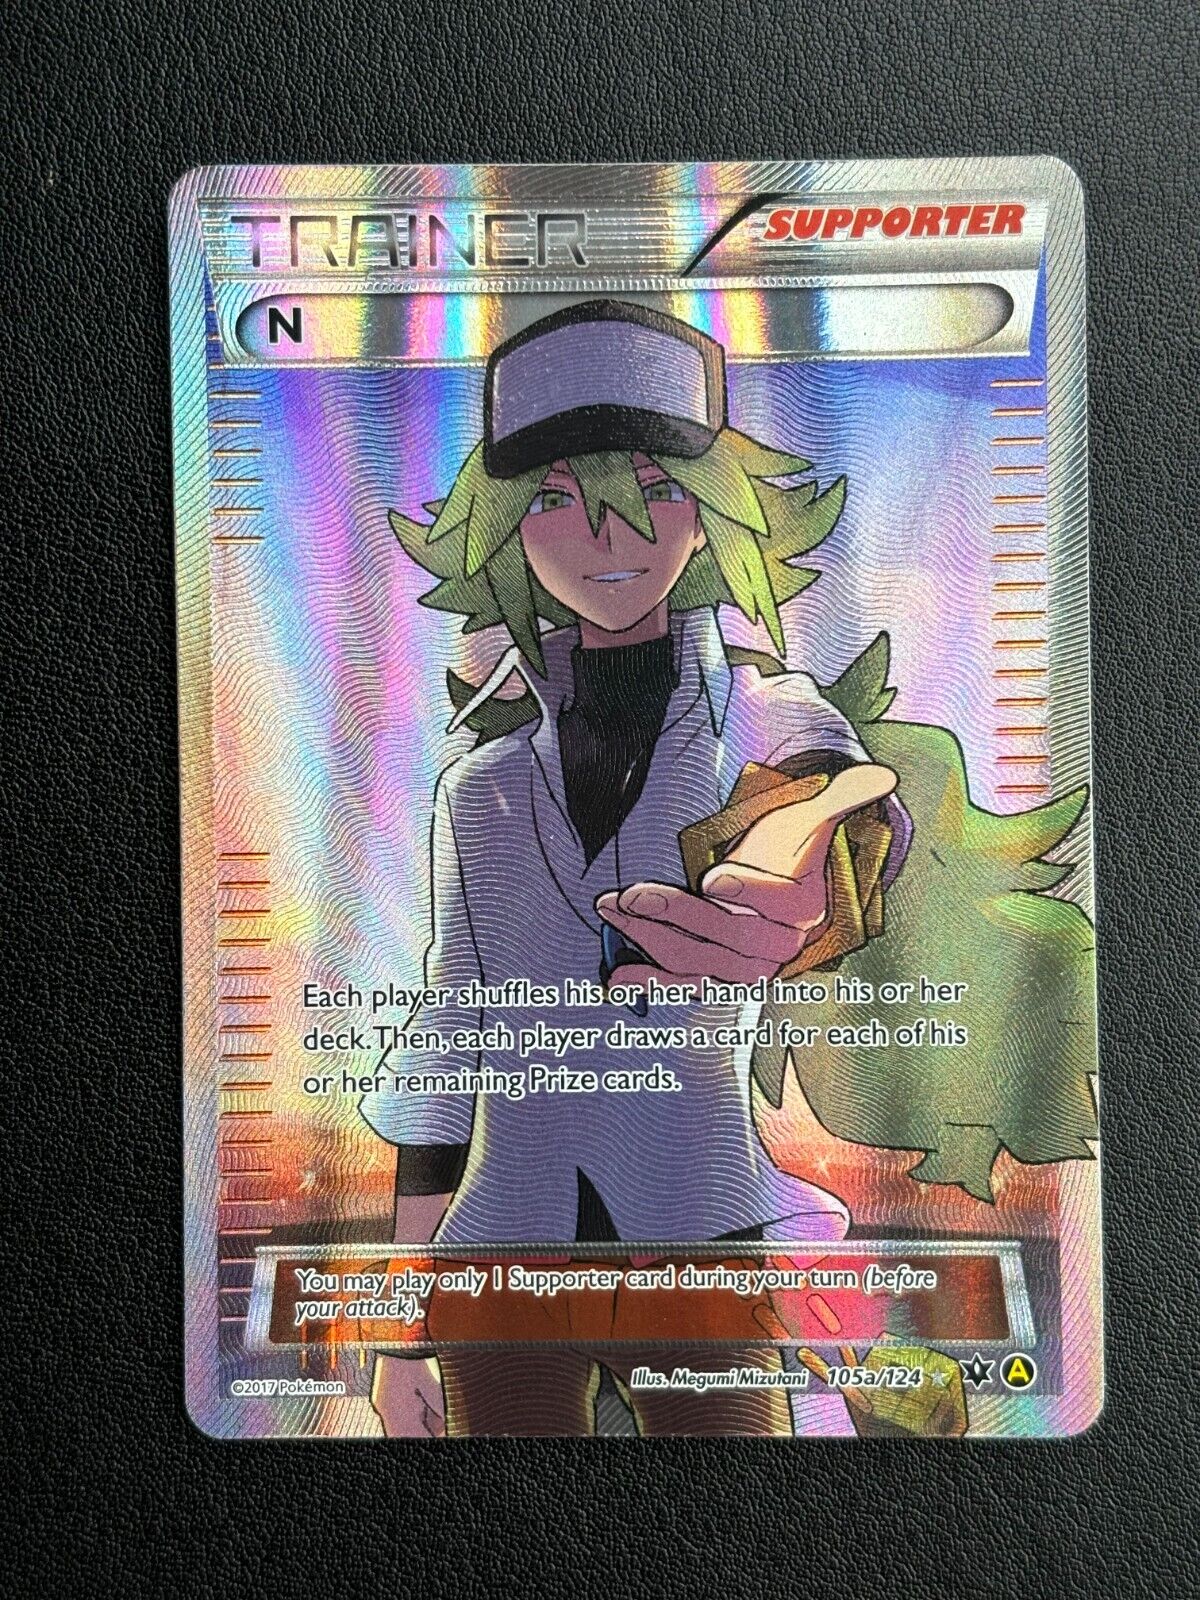 Pokemon Card - XY Premium collection - N Full art trainer 105a/124